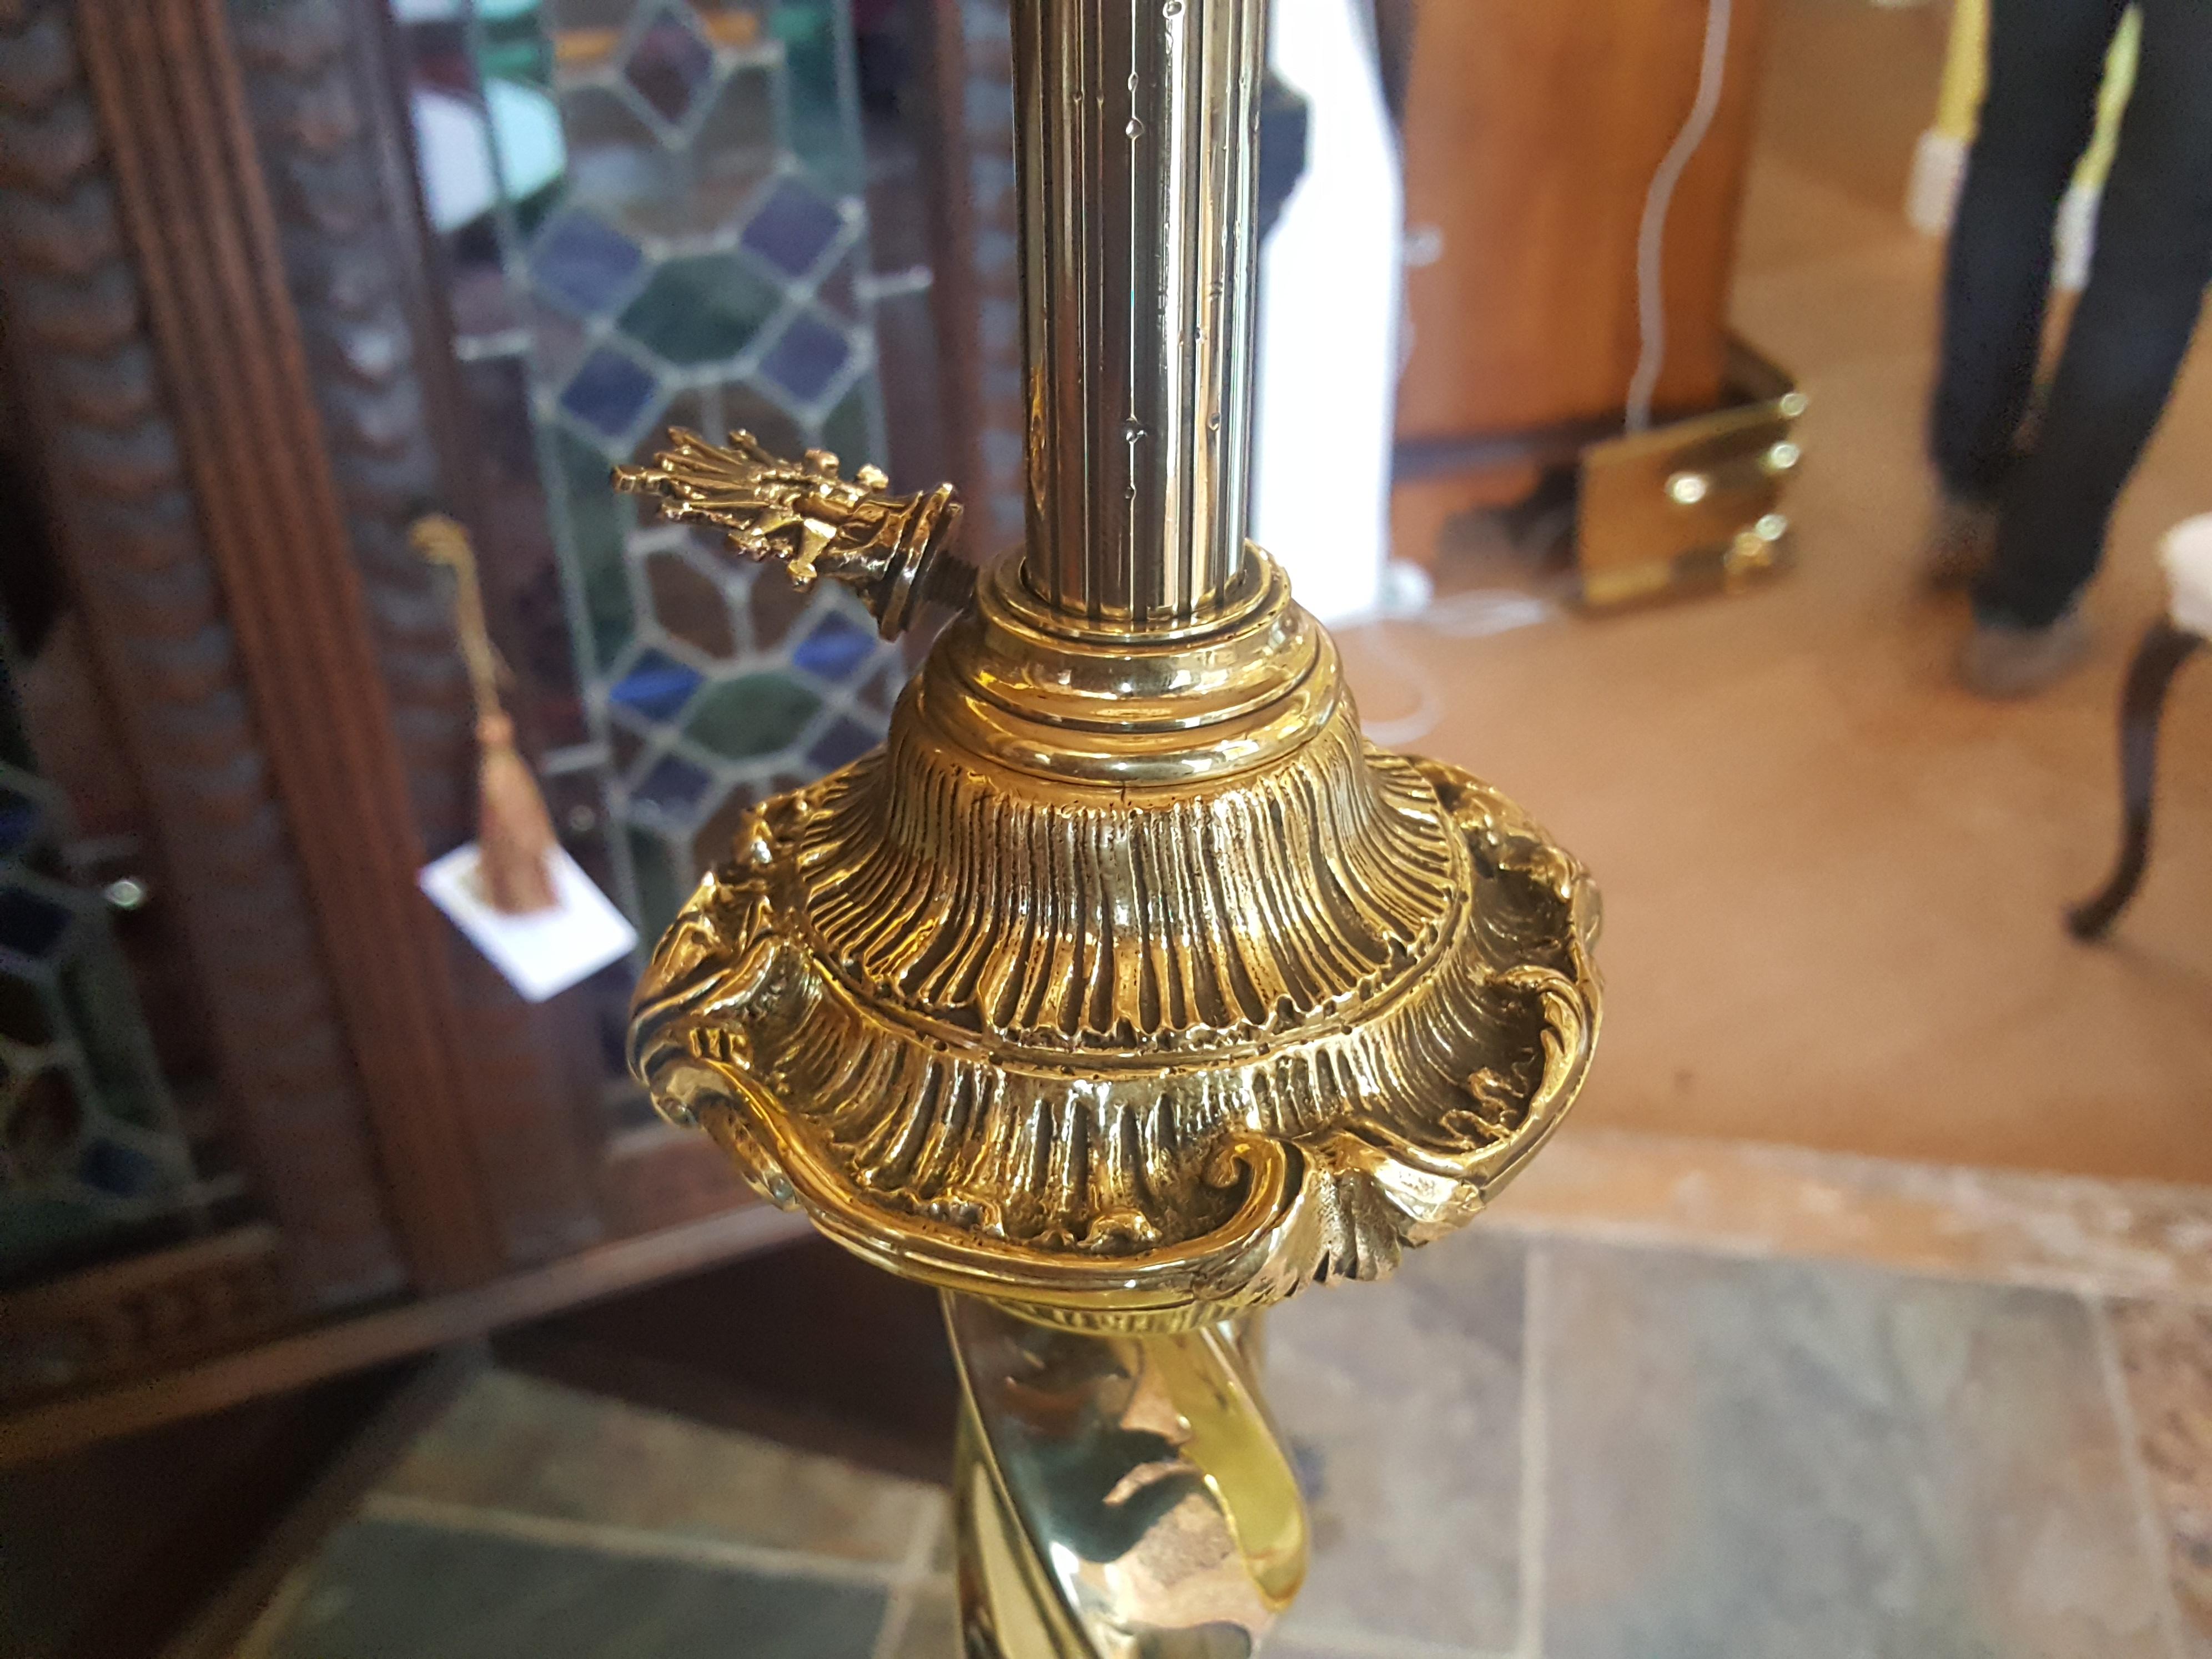 Edwardian Brass Extending Standard Lamp In Excellent Condition For Sale In Altrincham, Cheshire